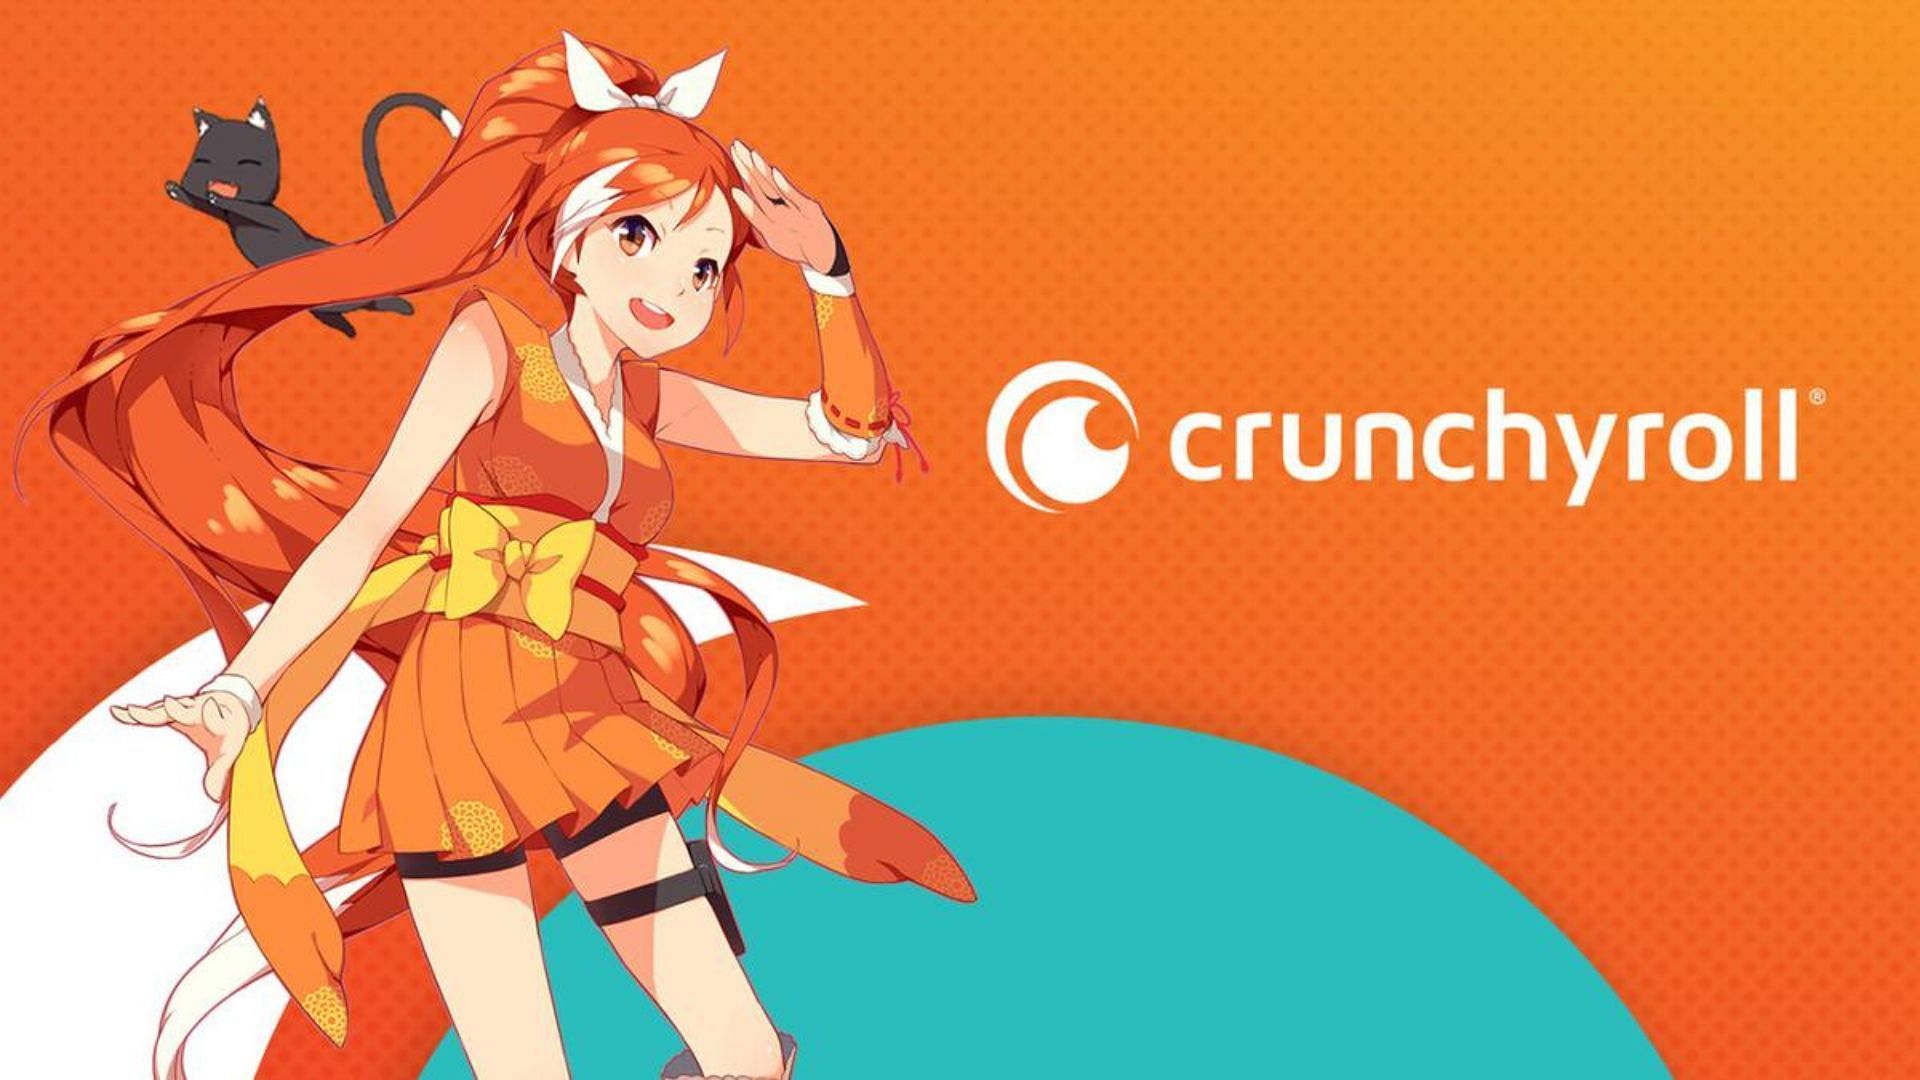 Why are anime fans so upset with Crunchyroll? Company's classaction